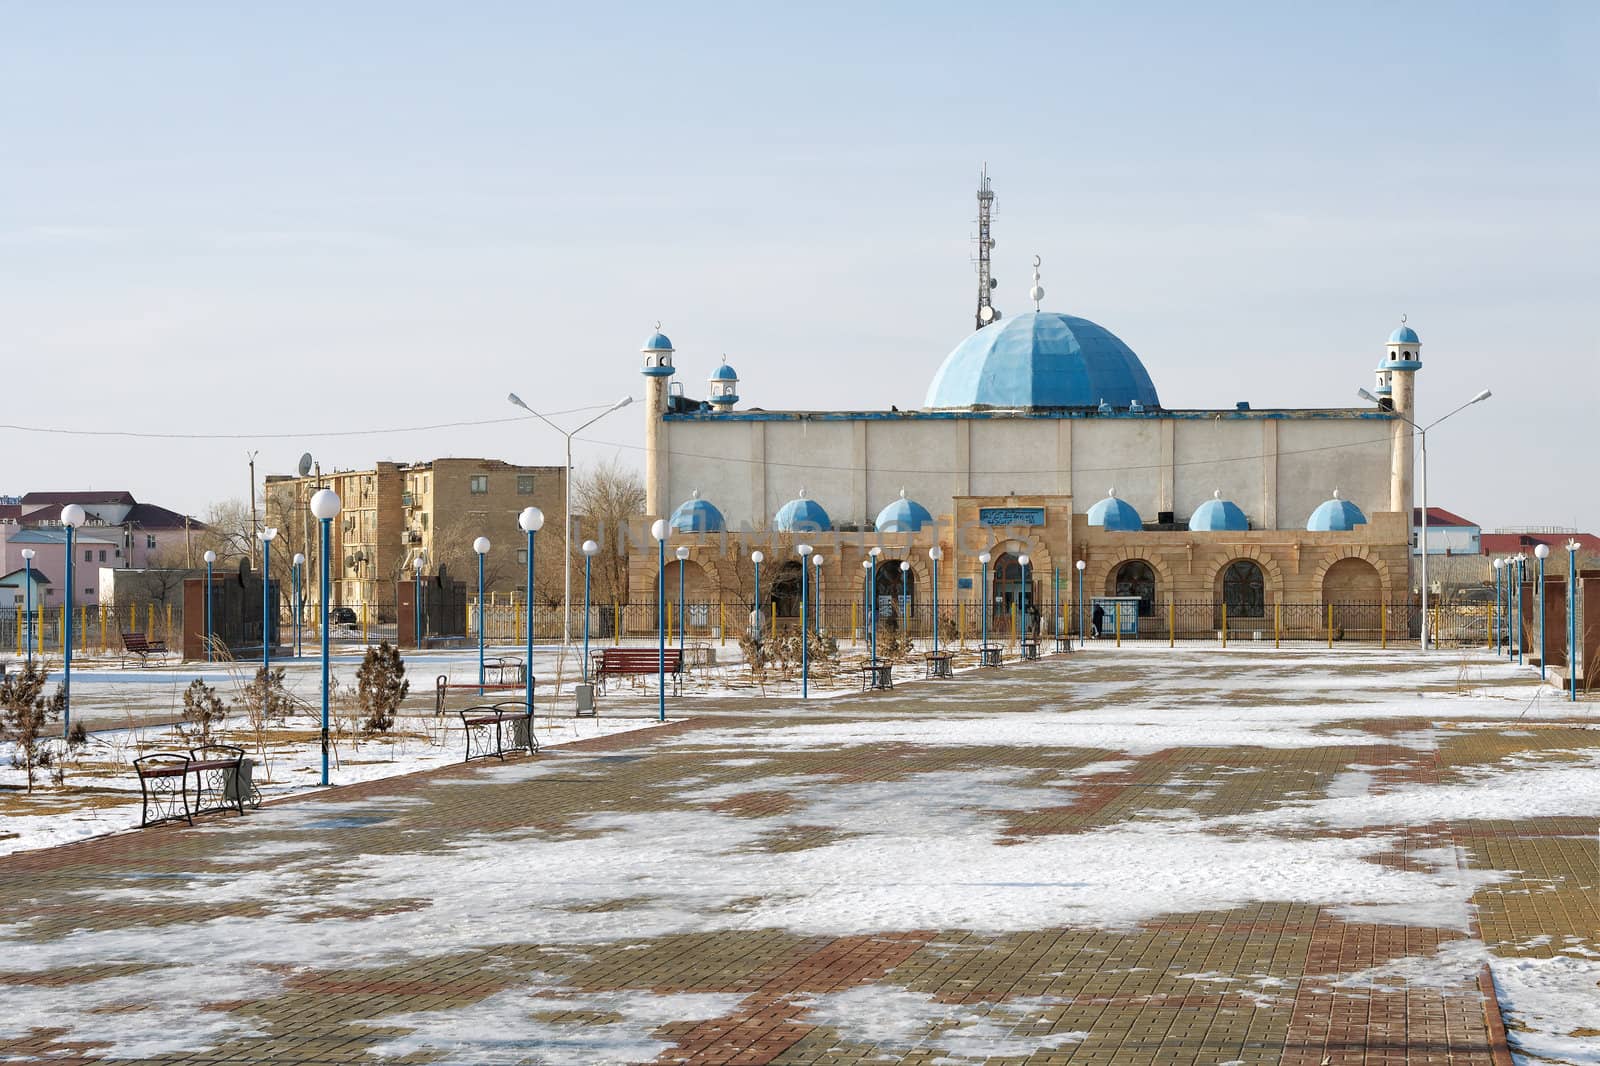 View of the mosque in the winter in Zhanaozen.